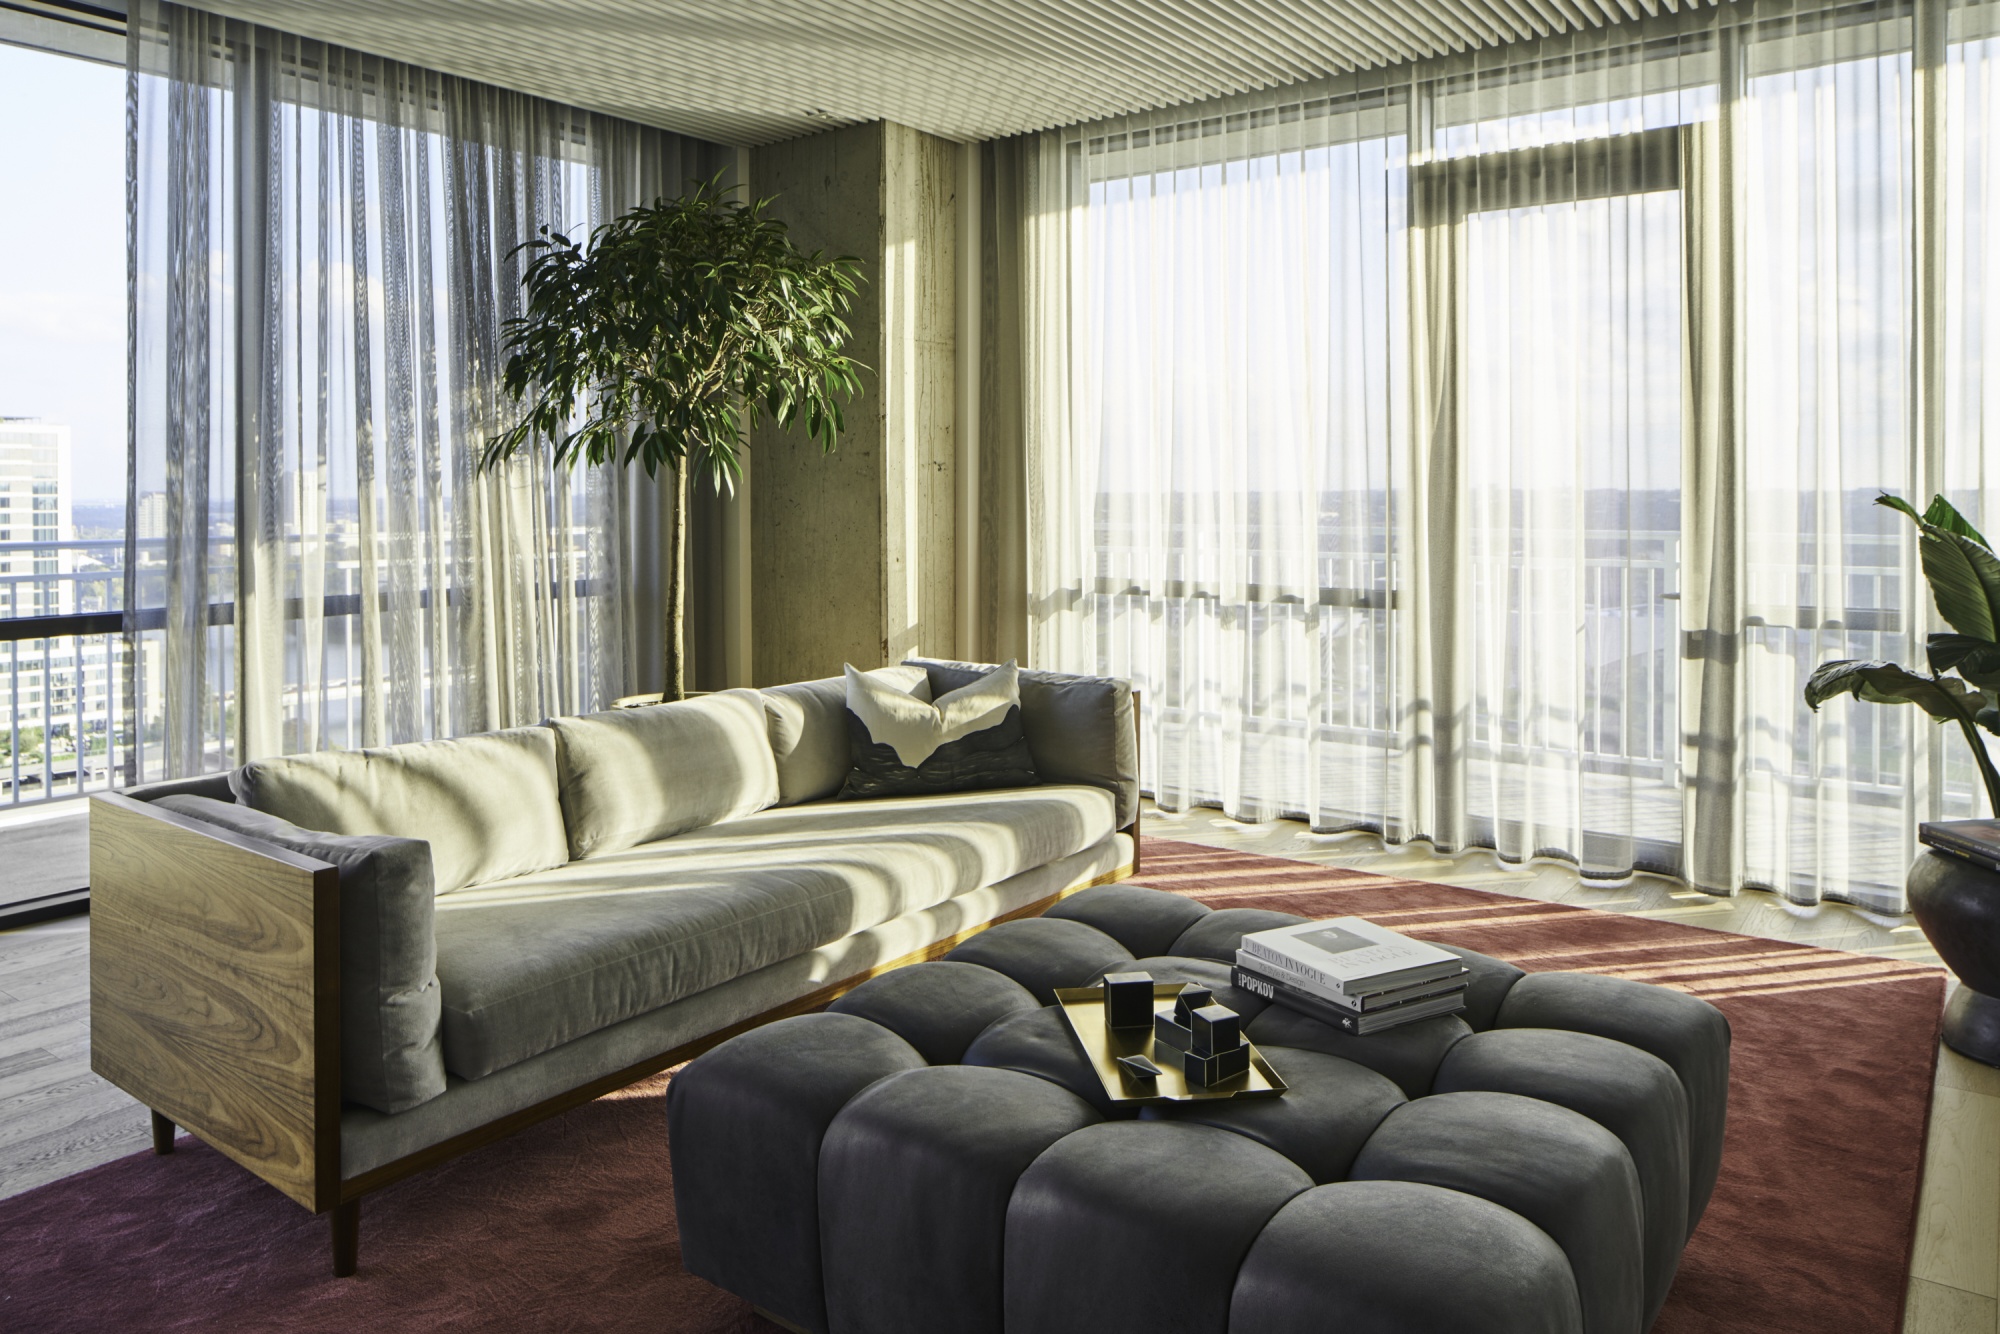 Elegance surrounds you from the 23rd floor.